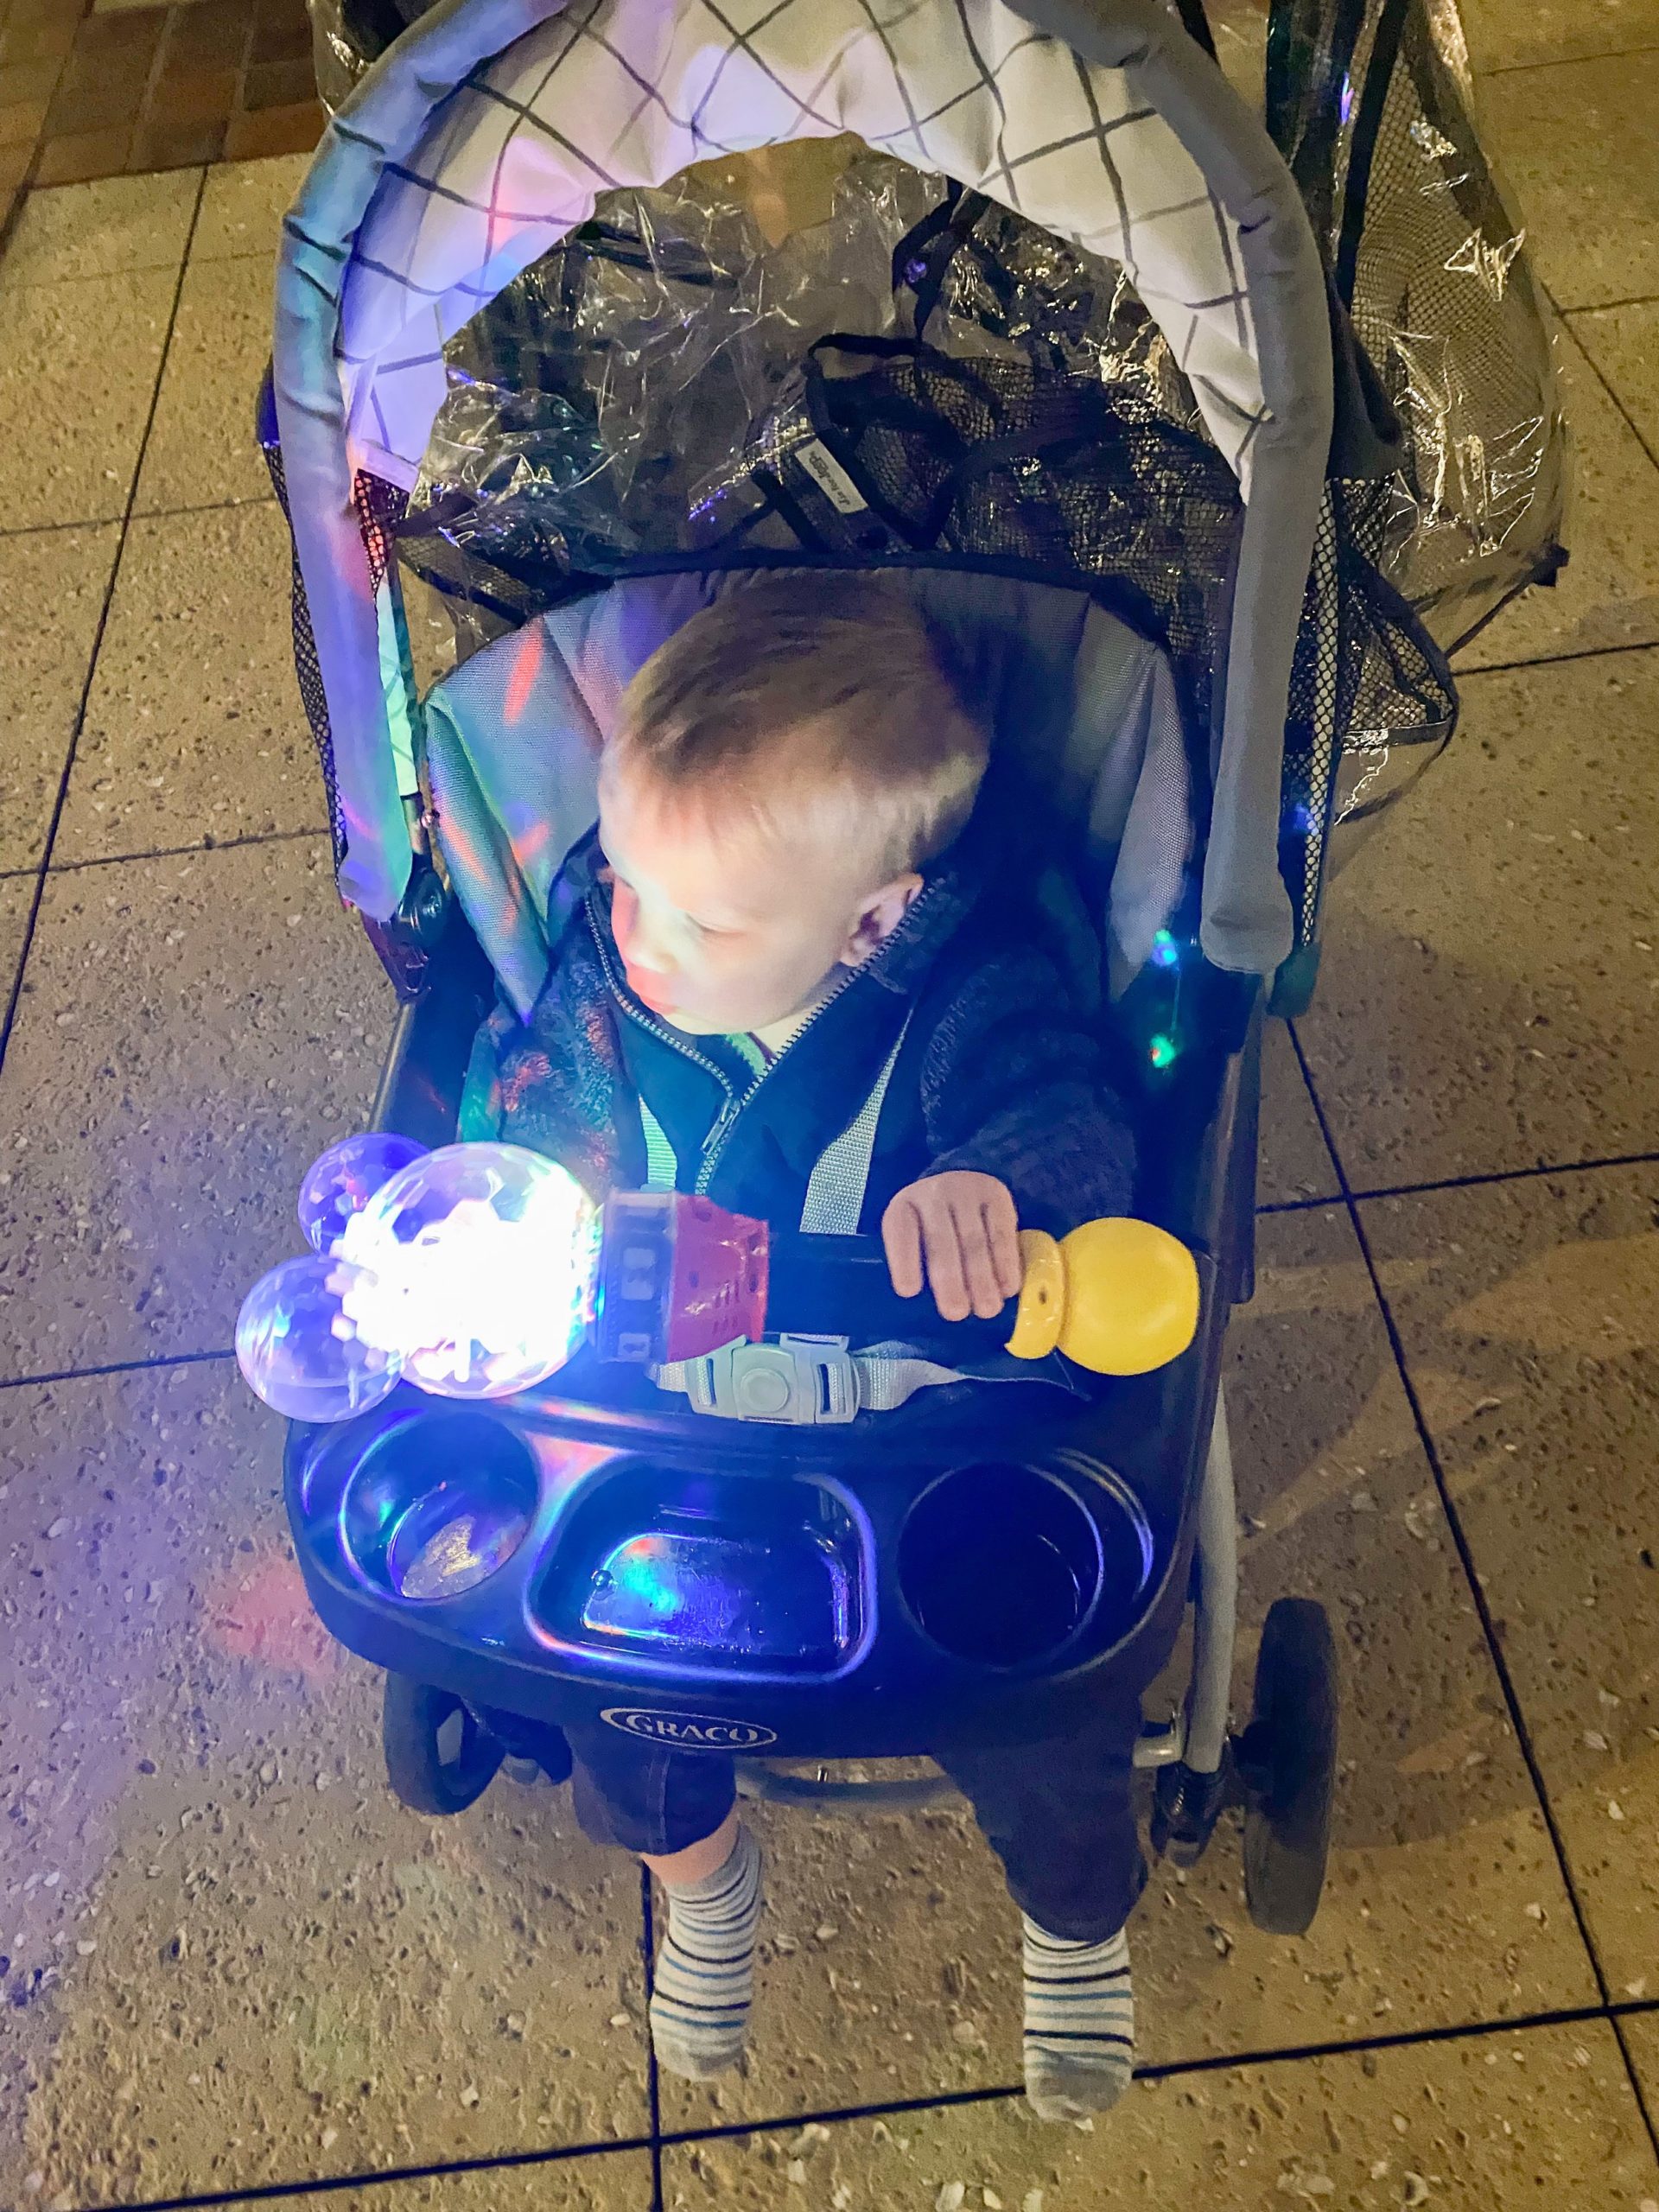  We didn’t need two balloons so we got Lucas’s light up bubble wand out so he didn’t want a balloon too badly. 